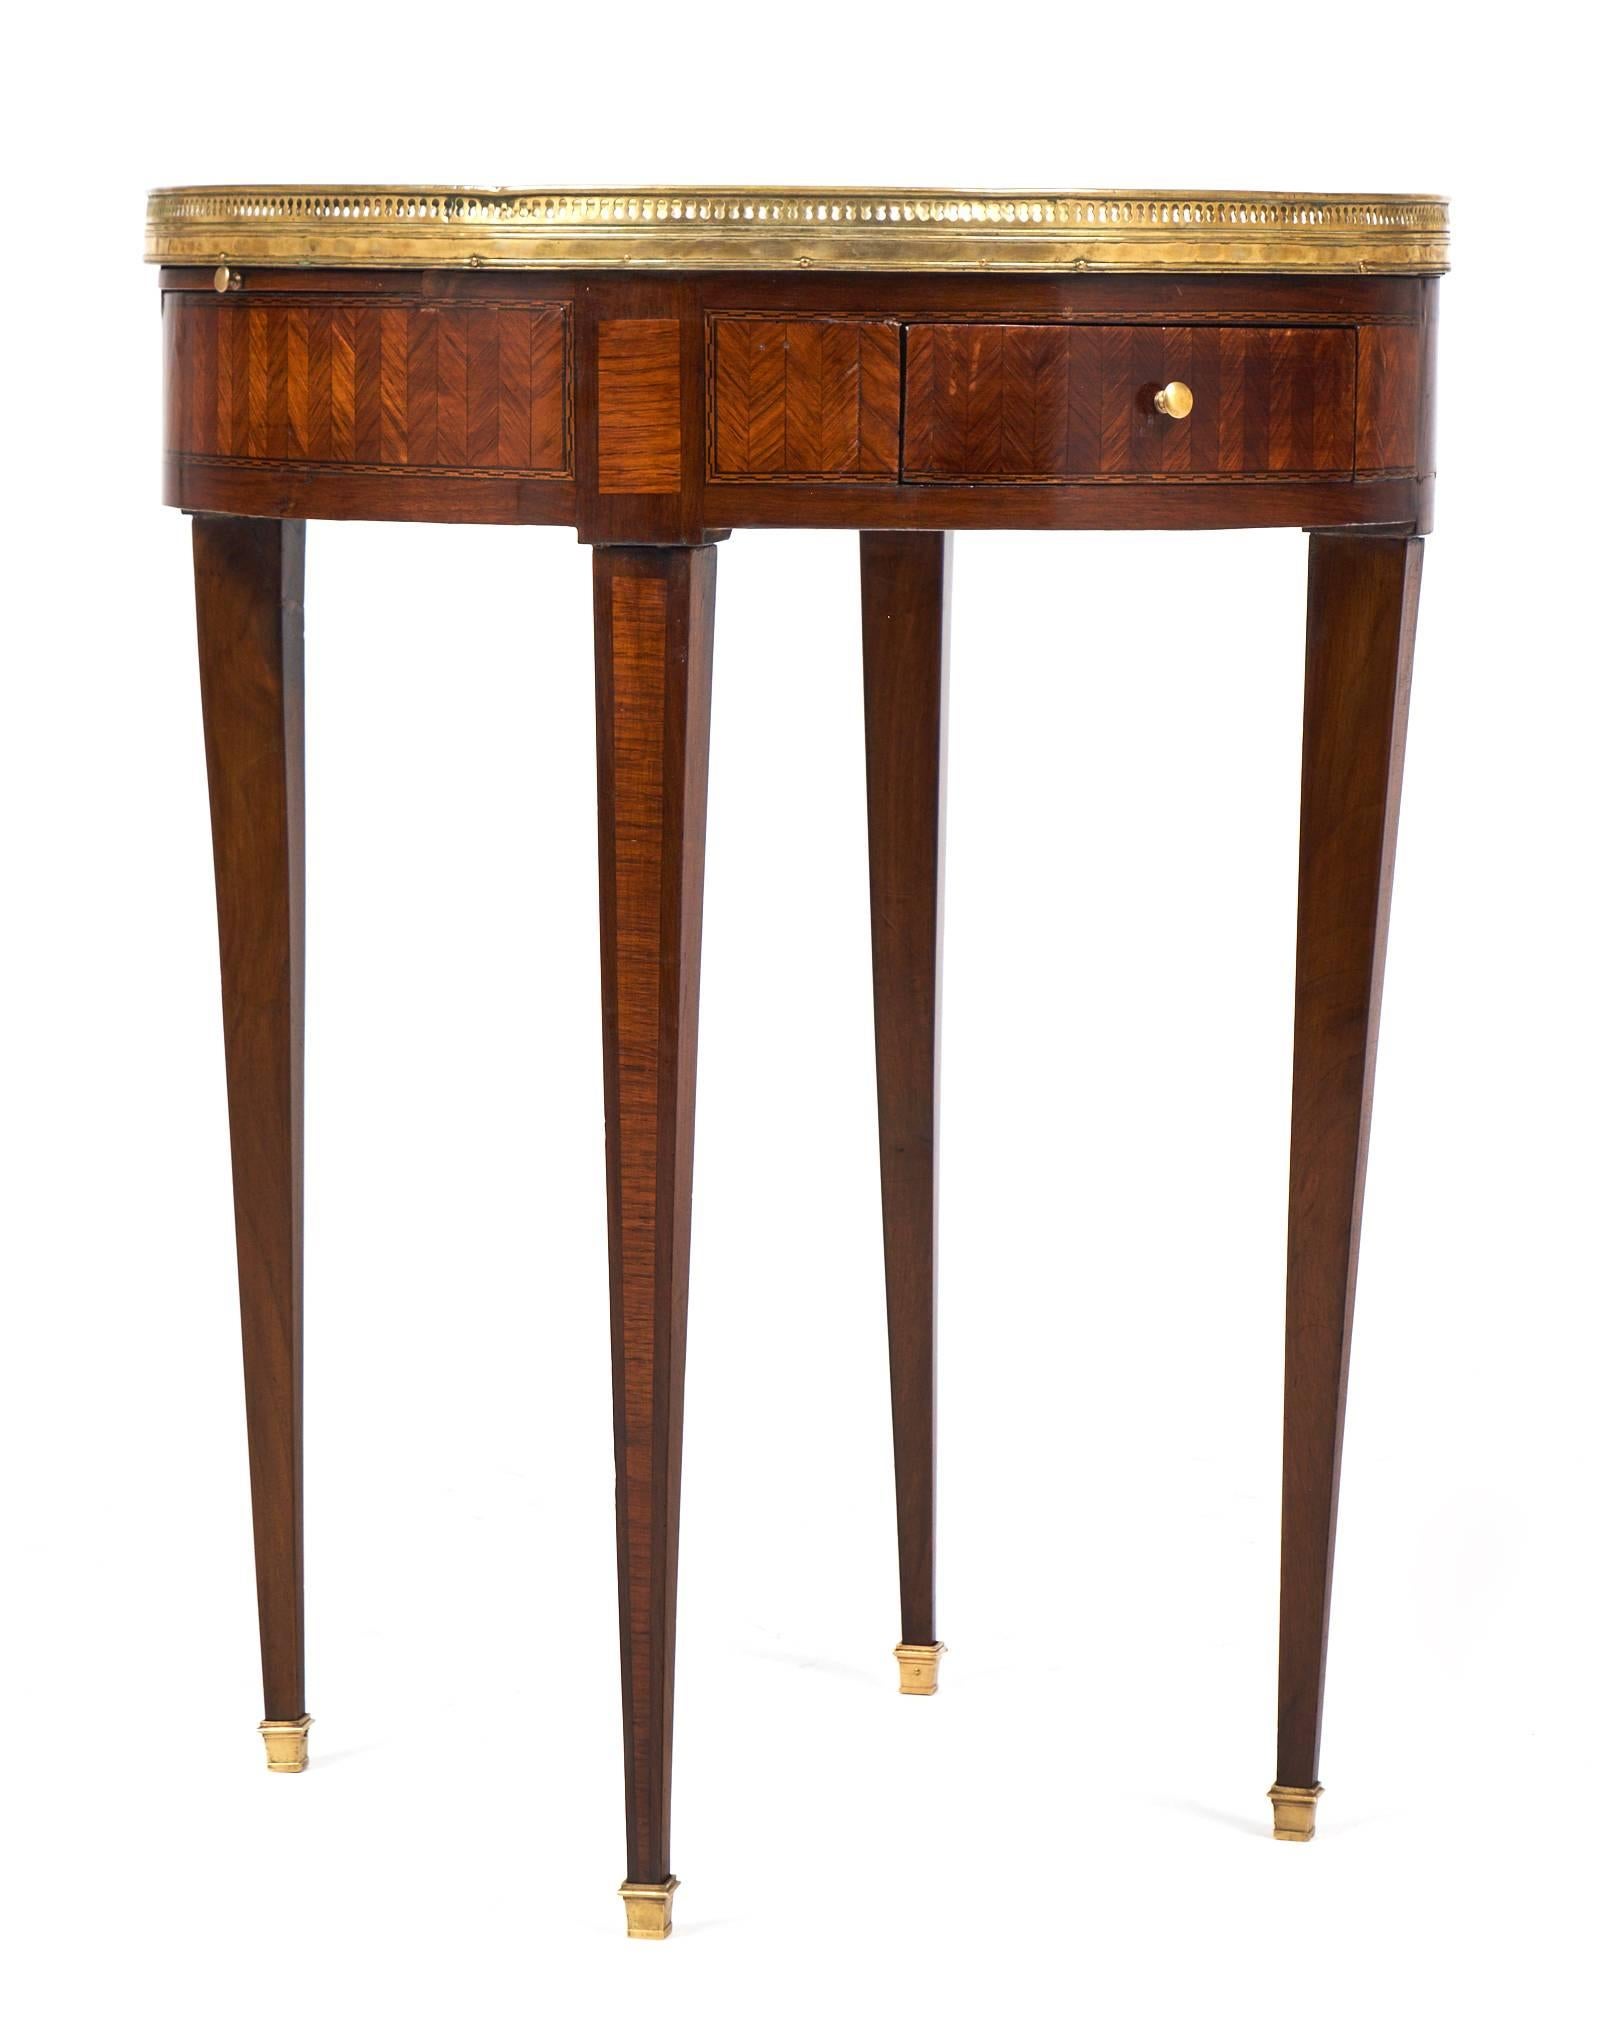 Early 20th Century French Louis XVI Mirror-Top Marqueted Bouillotte Table